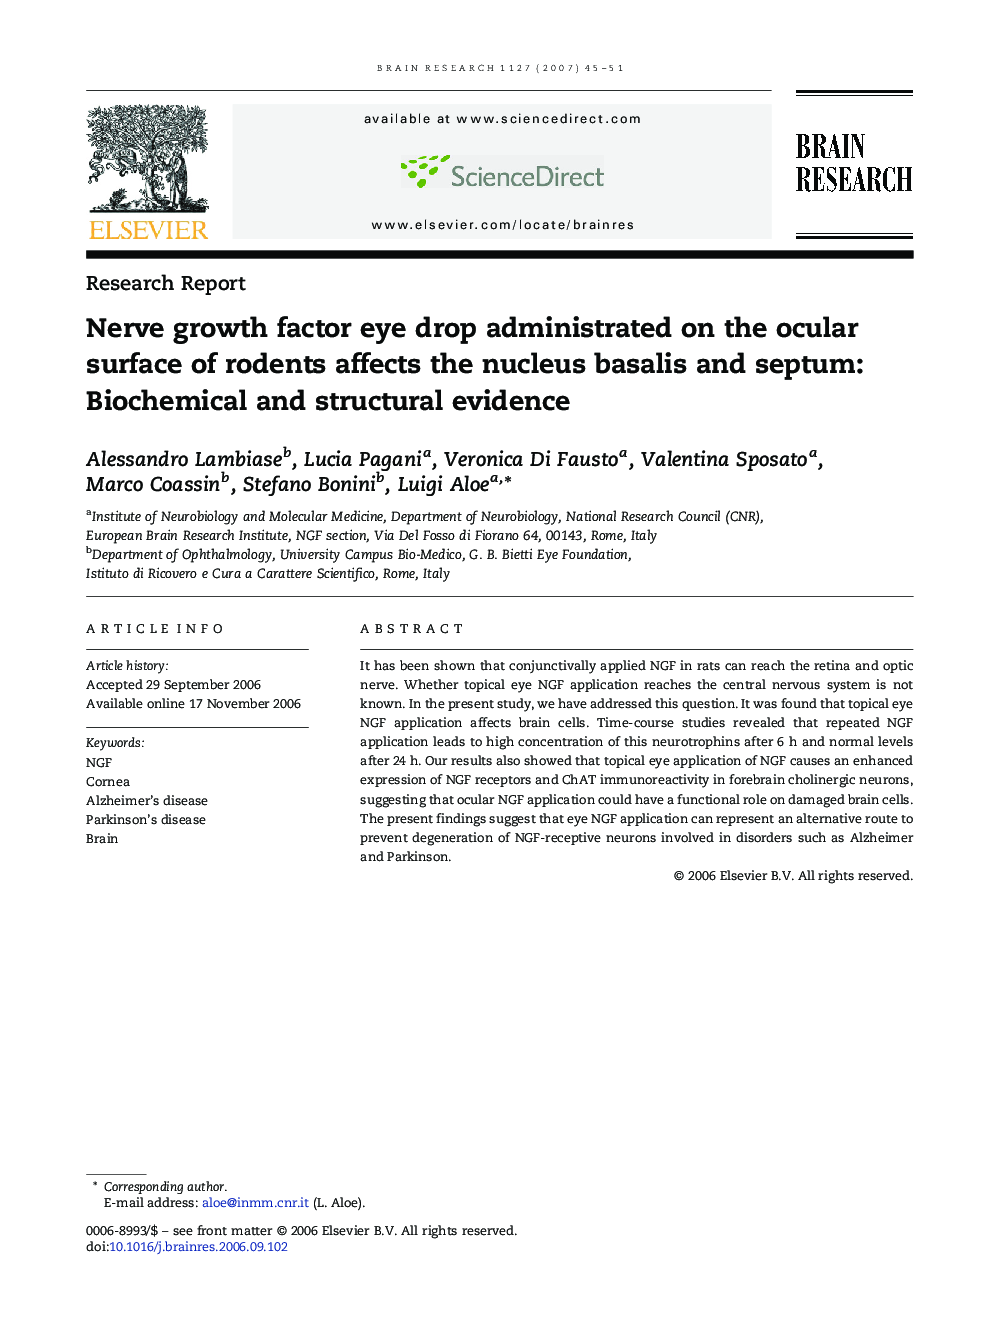 Nerve growth factor eye drop administrated on the ocular surface of rodents affects the nucleus basalis and septum: Biochemical and structural evidence